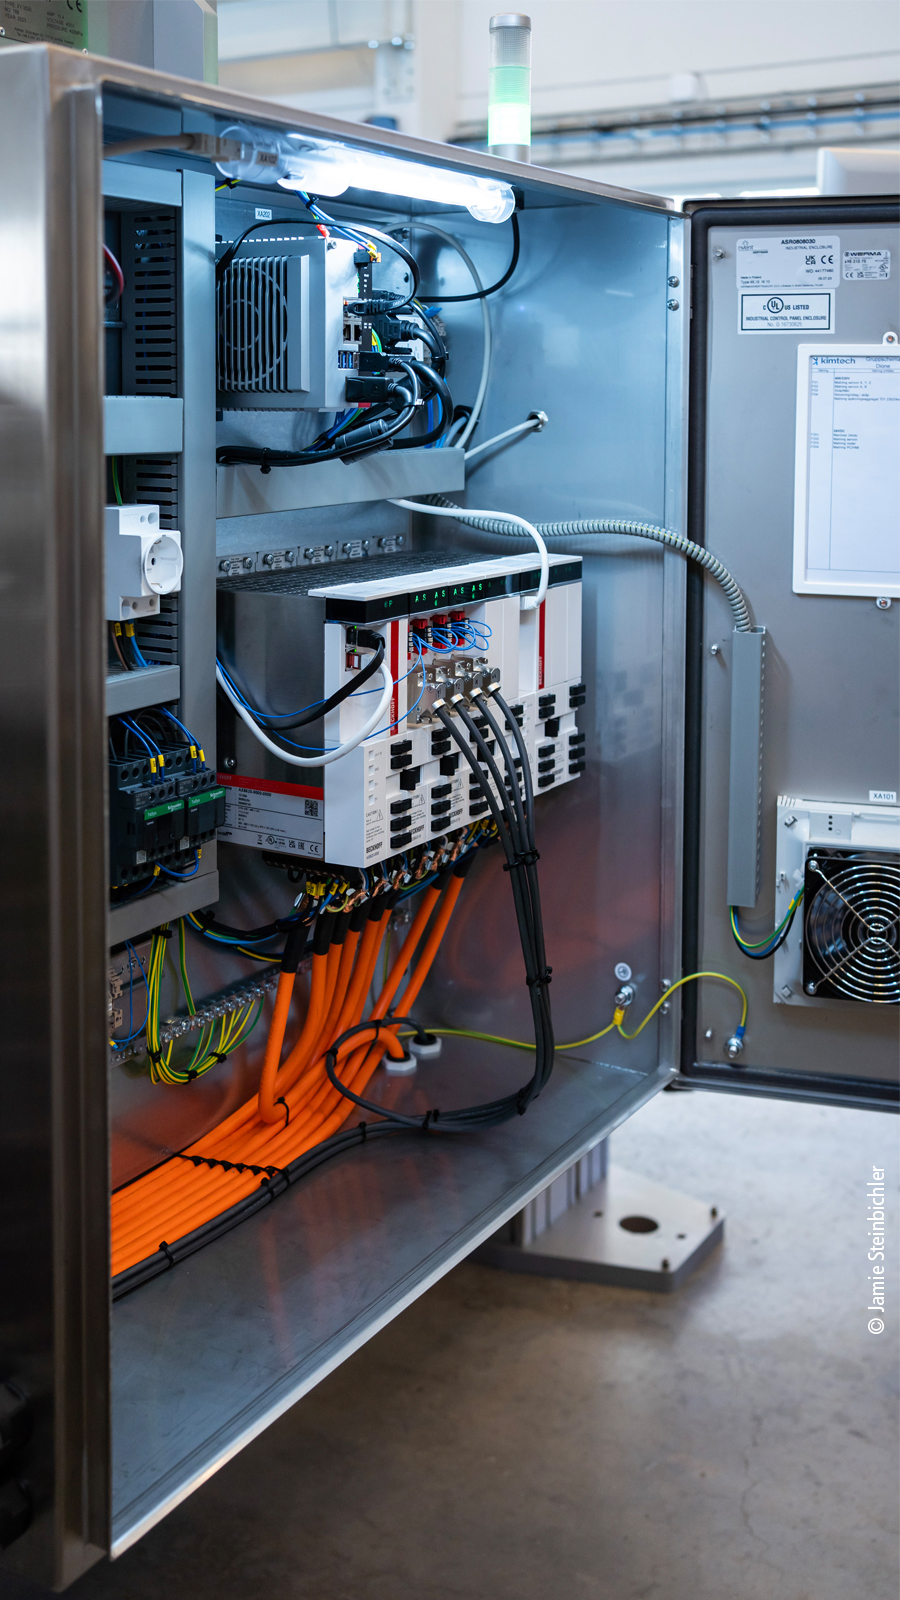 Despite the many axes, the control cabinet remains compact and clearly arranged, with the AX8000 multi-axis servo system (bottom) and the C6030 ultra-compact Industrial PC (top).